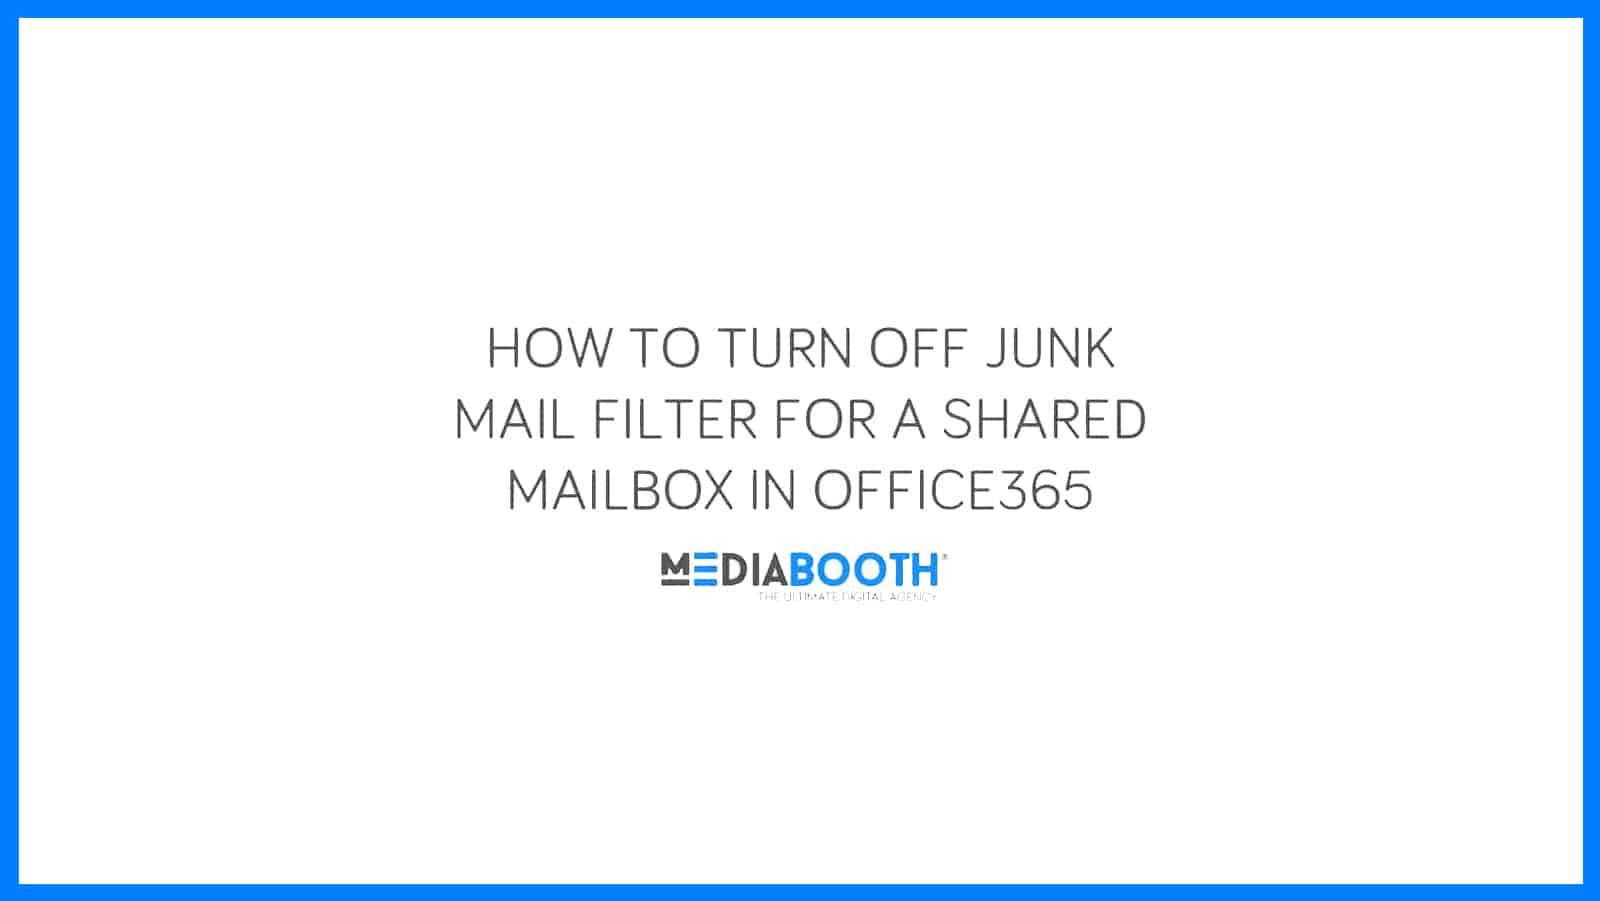 how to turn off junk mail filter for a shared mailbox in office365